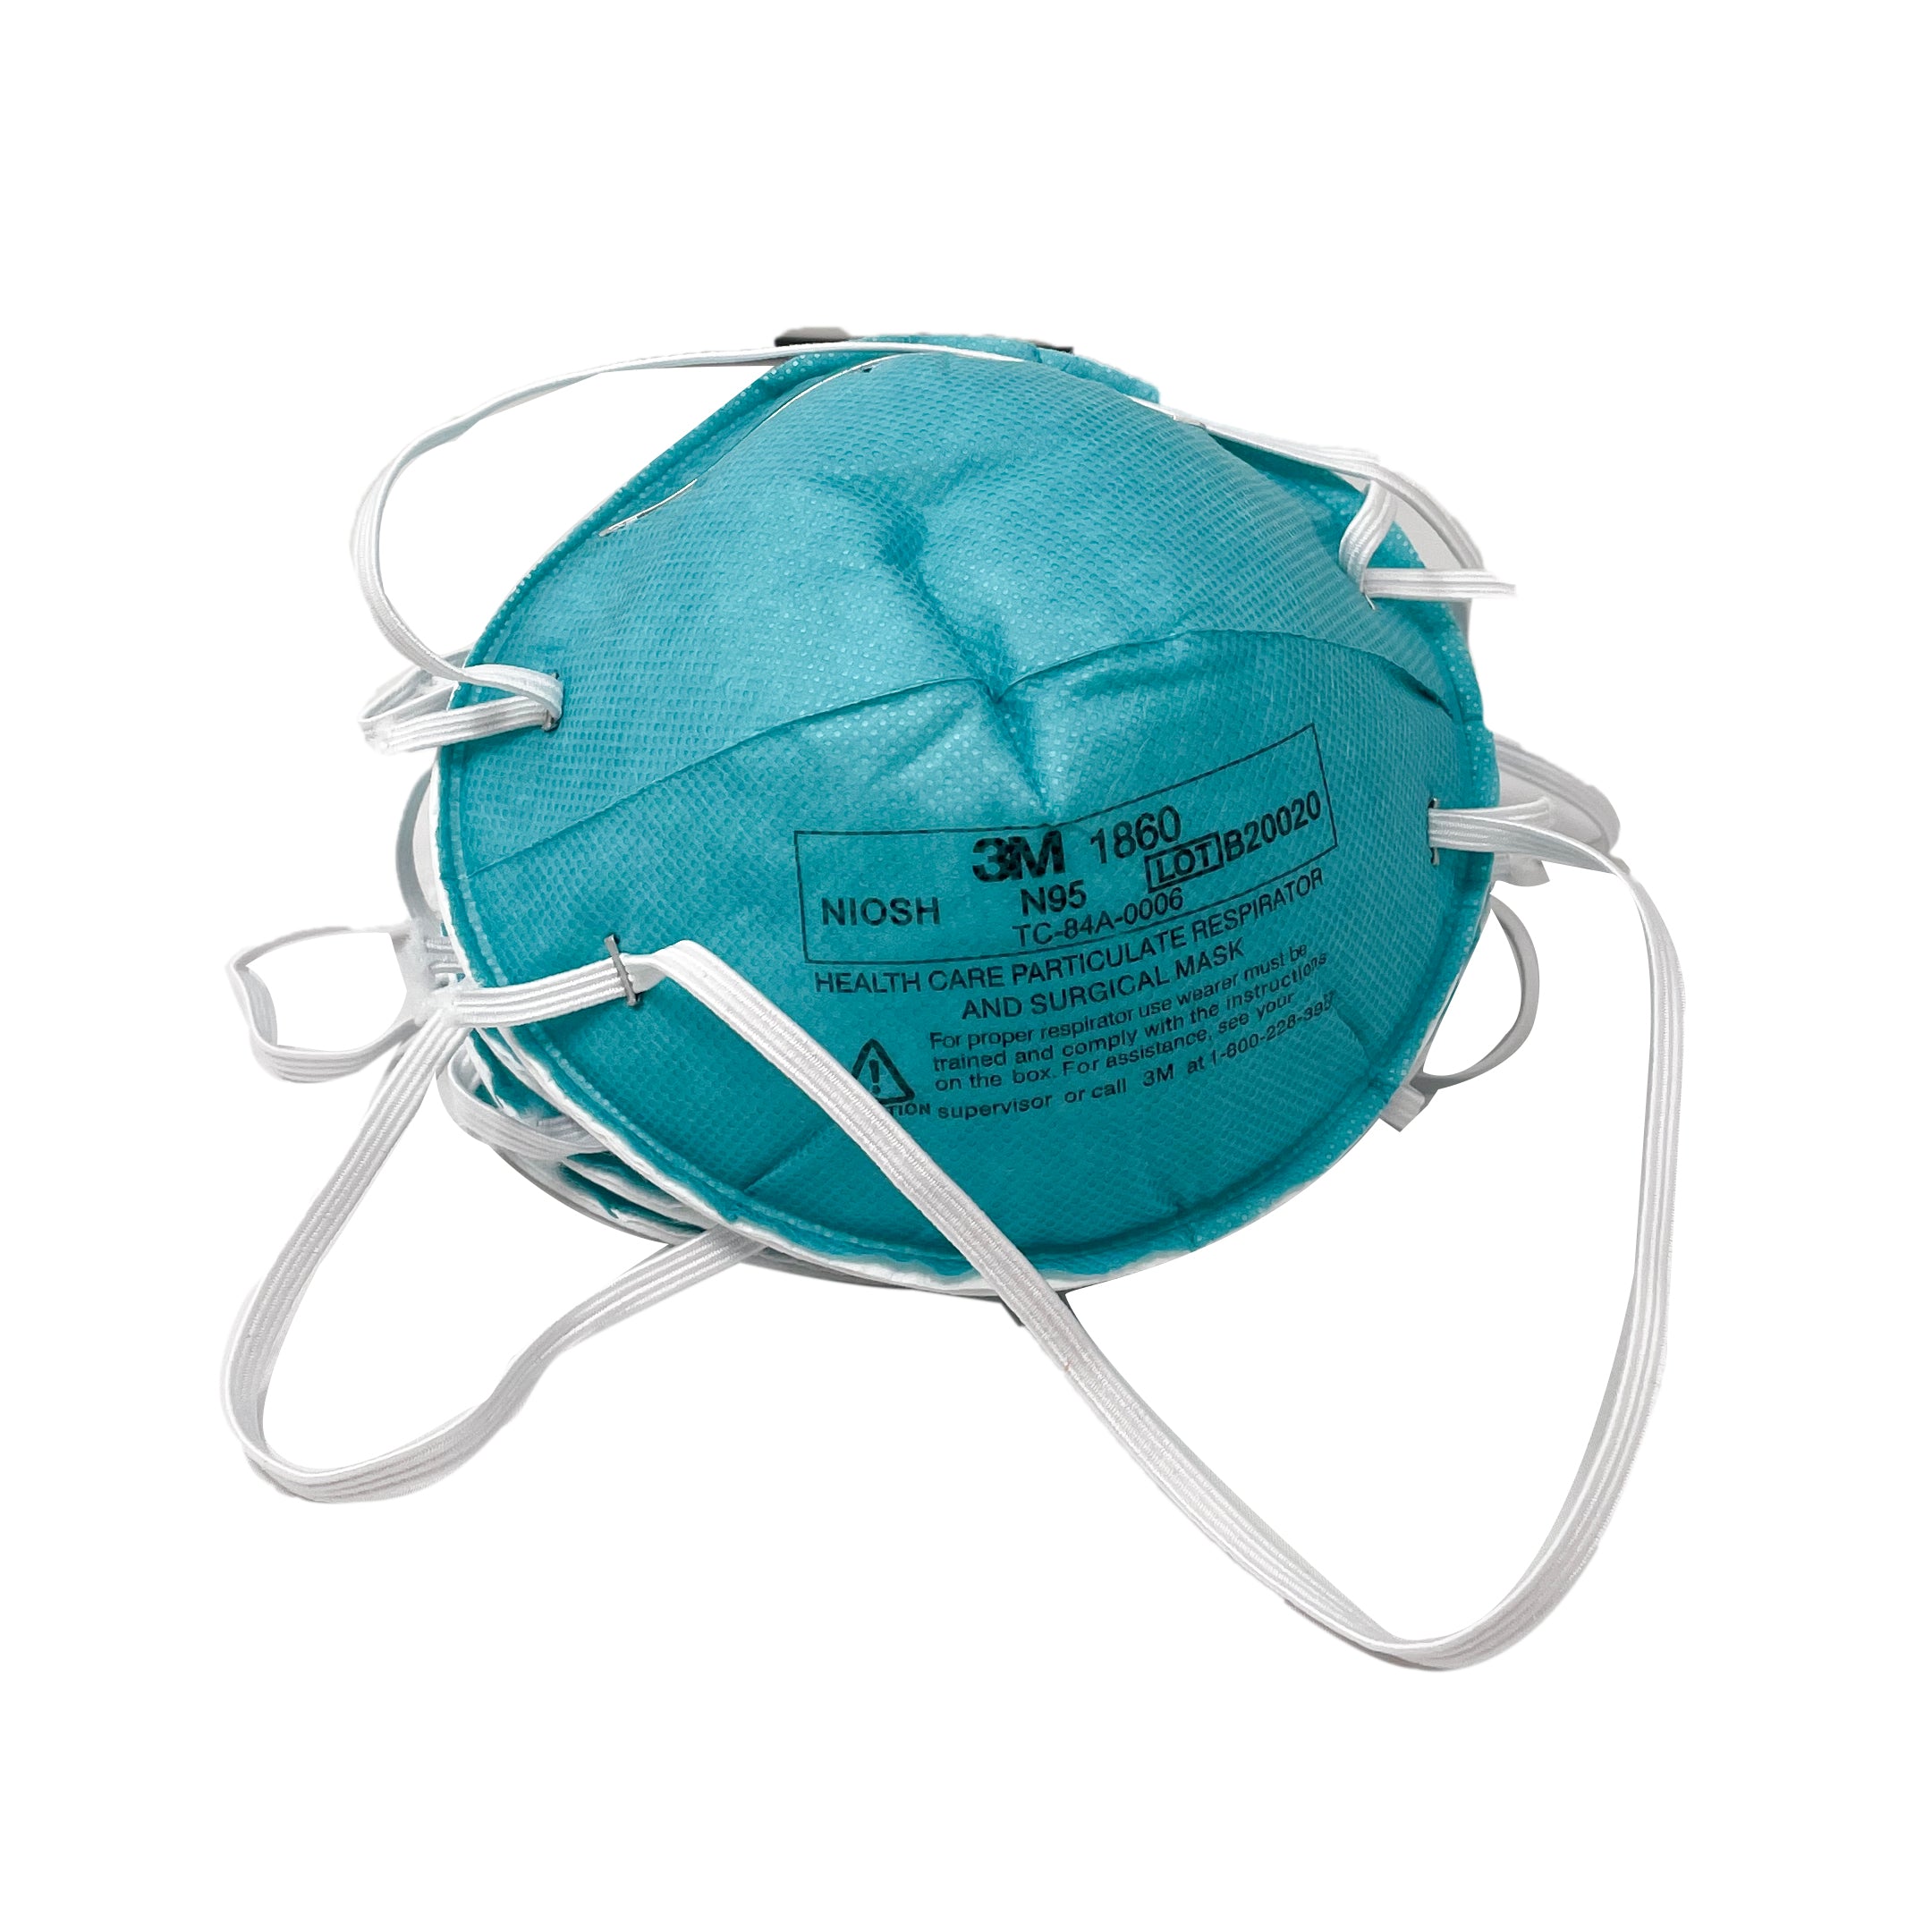 3M 1860 Surgical Respirator N95 - Possible Fake